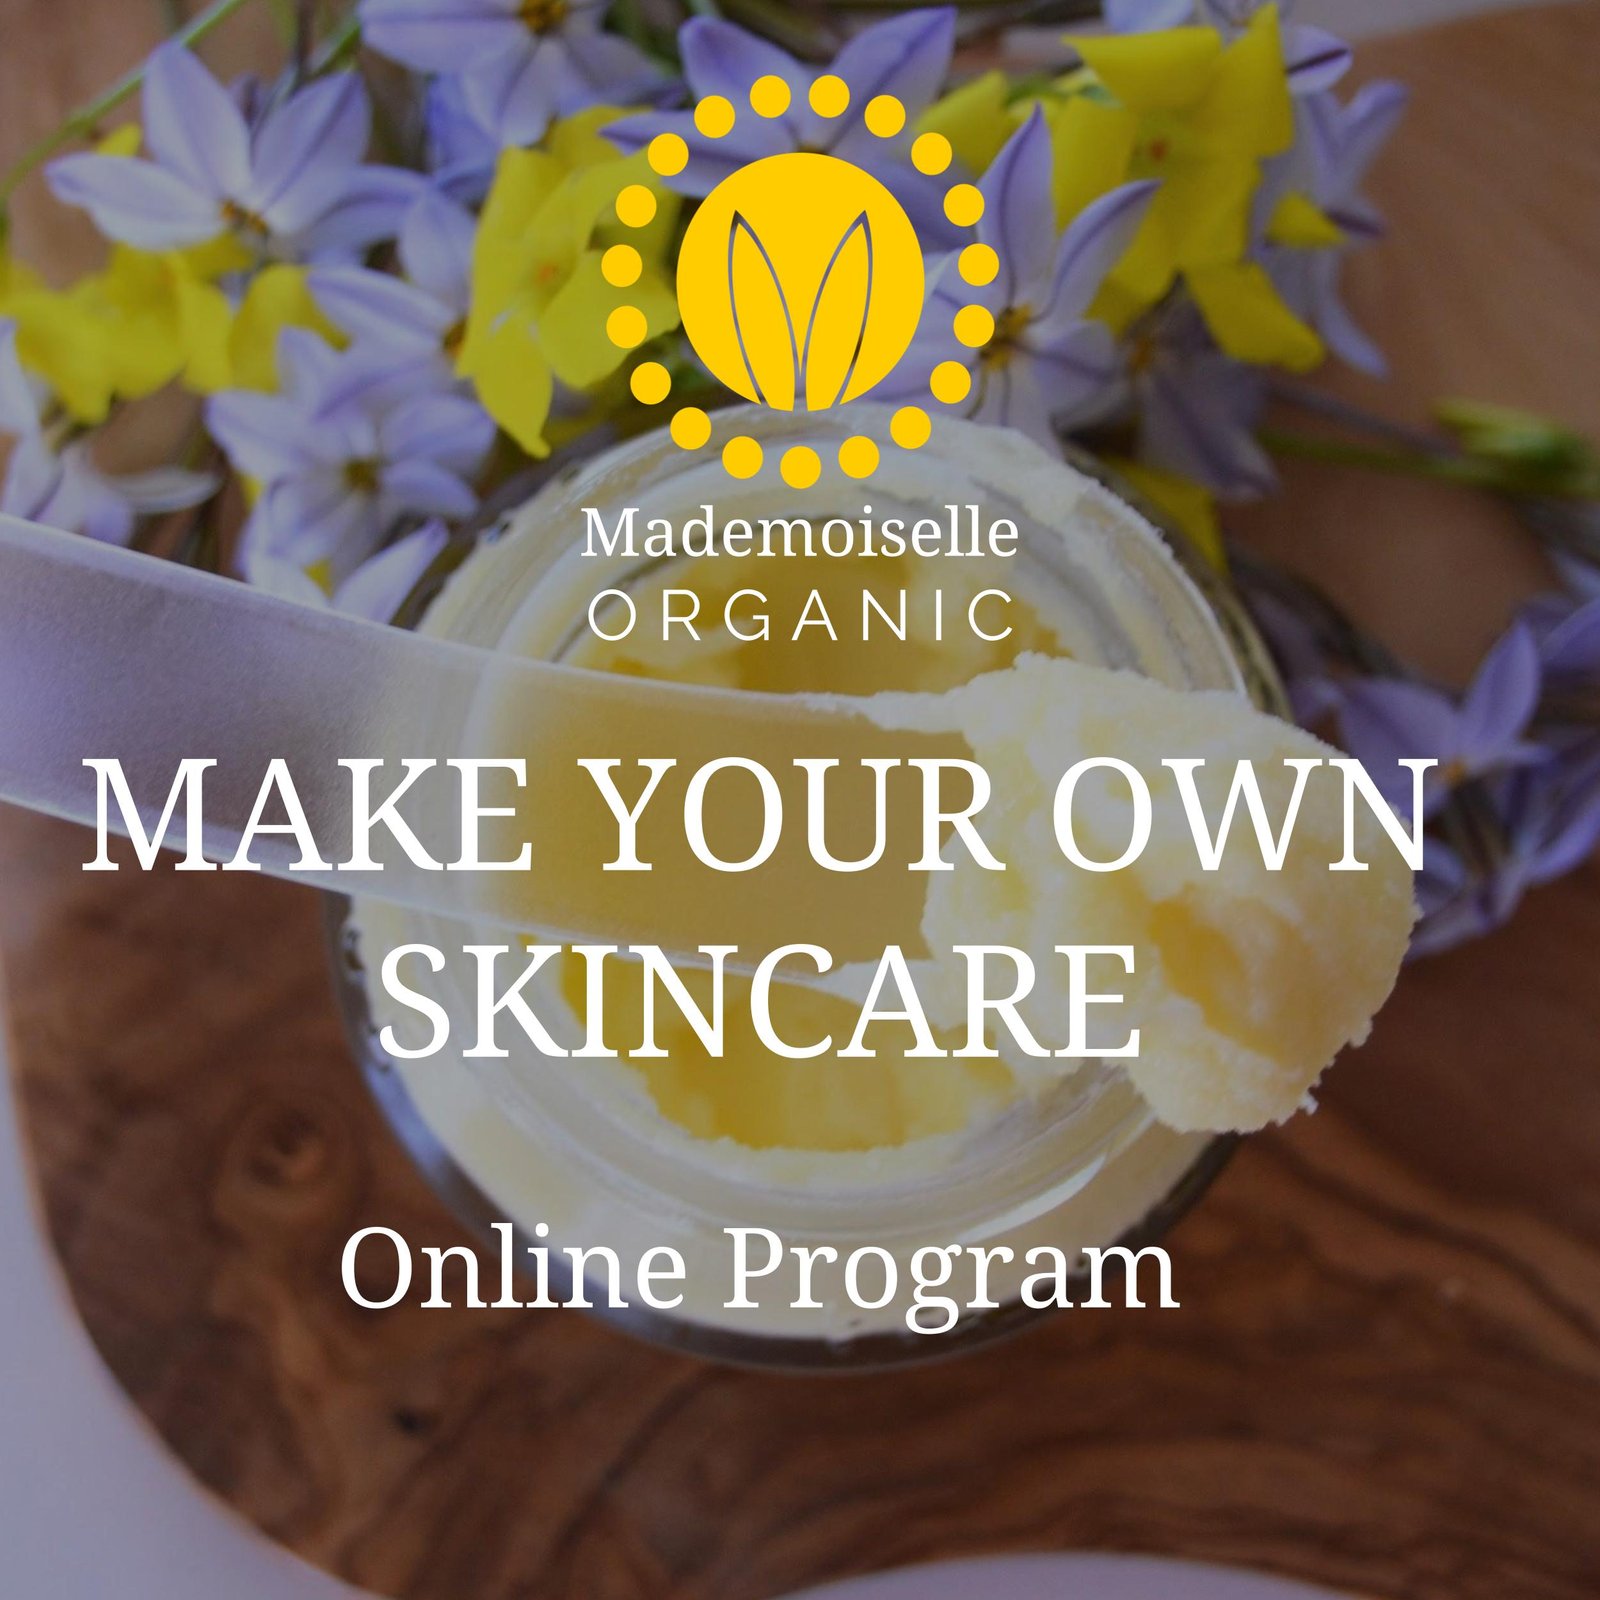 Make your own skincare program - Discover my online courses